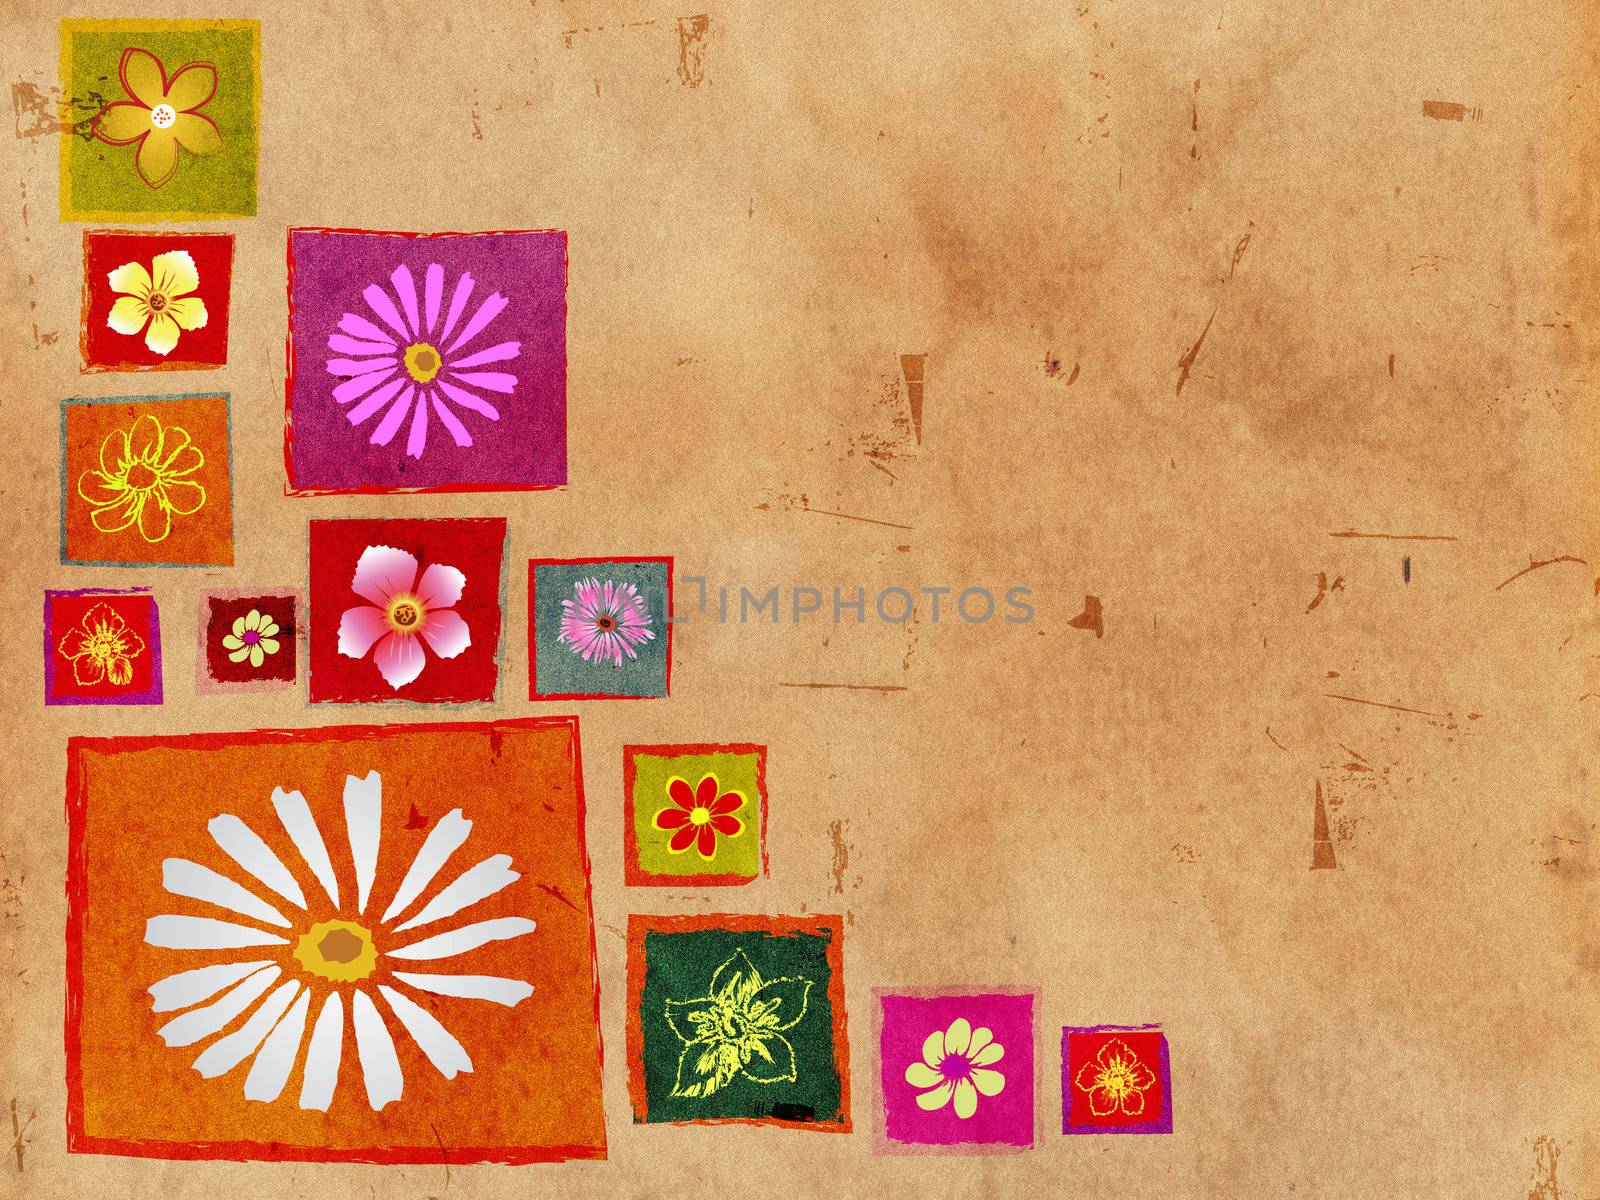 flowers in box frames over old paper